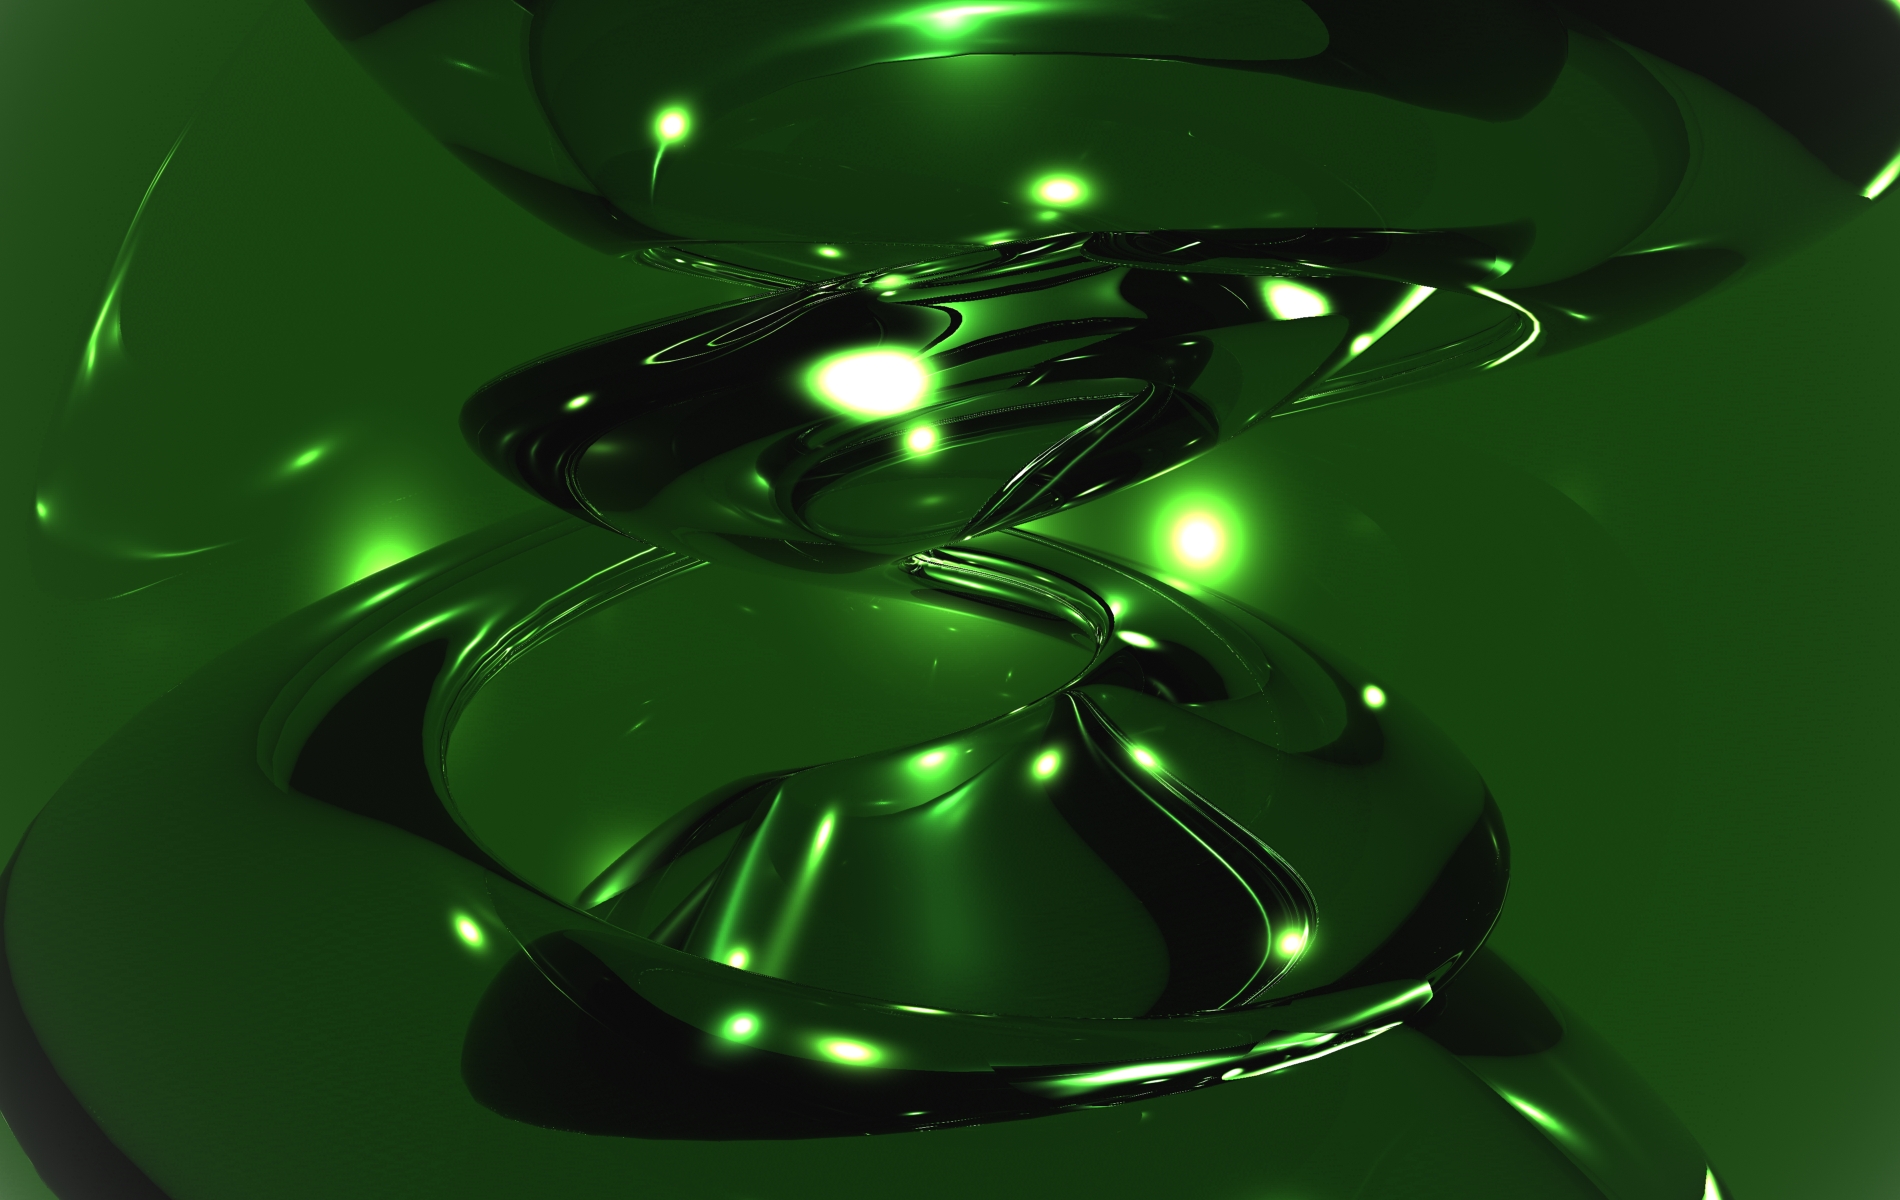 Mobile 图片Wallippo 和Awesome Neon Green 桌面Neon Green 桌面图片For Android 图片s  Iphone Creator Rooms Maker Walls Mobile Free 桌面Mobile 图片s 照片从Kristoforo   照片图像图像